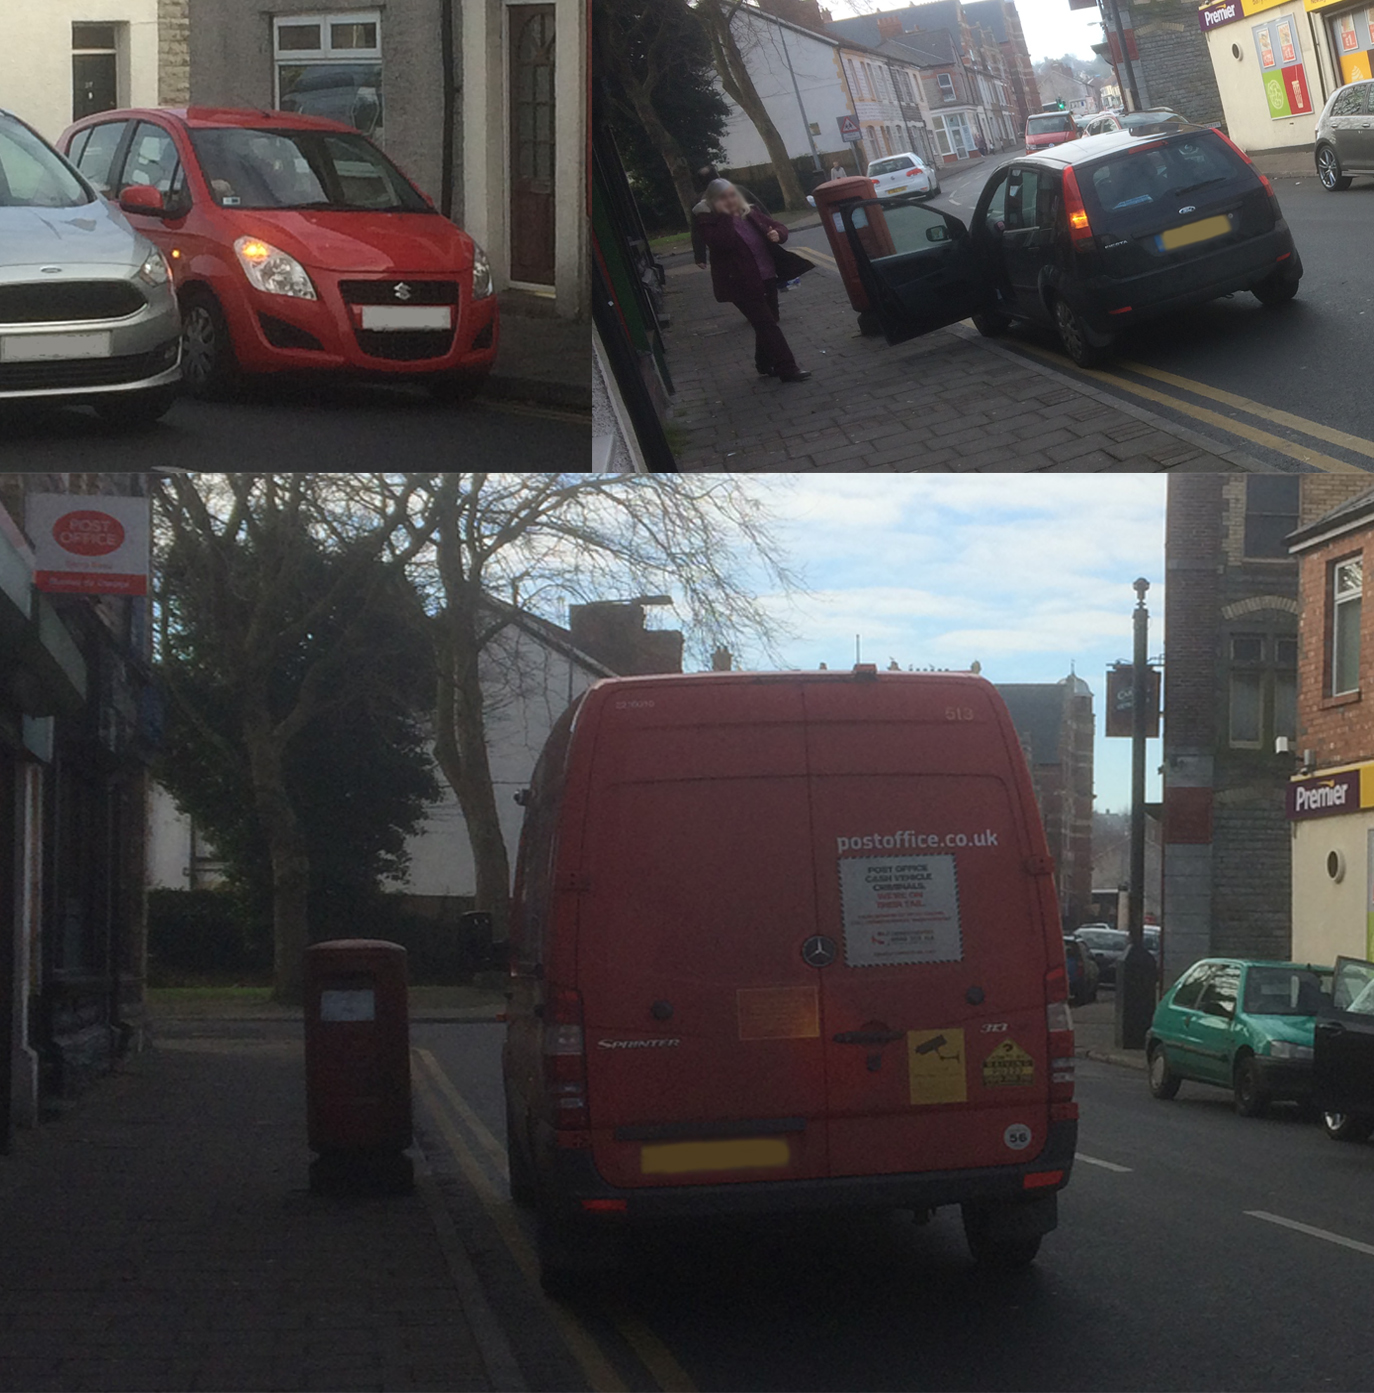 Vehicles parking illegally outside the post office